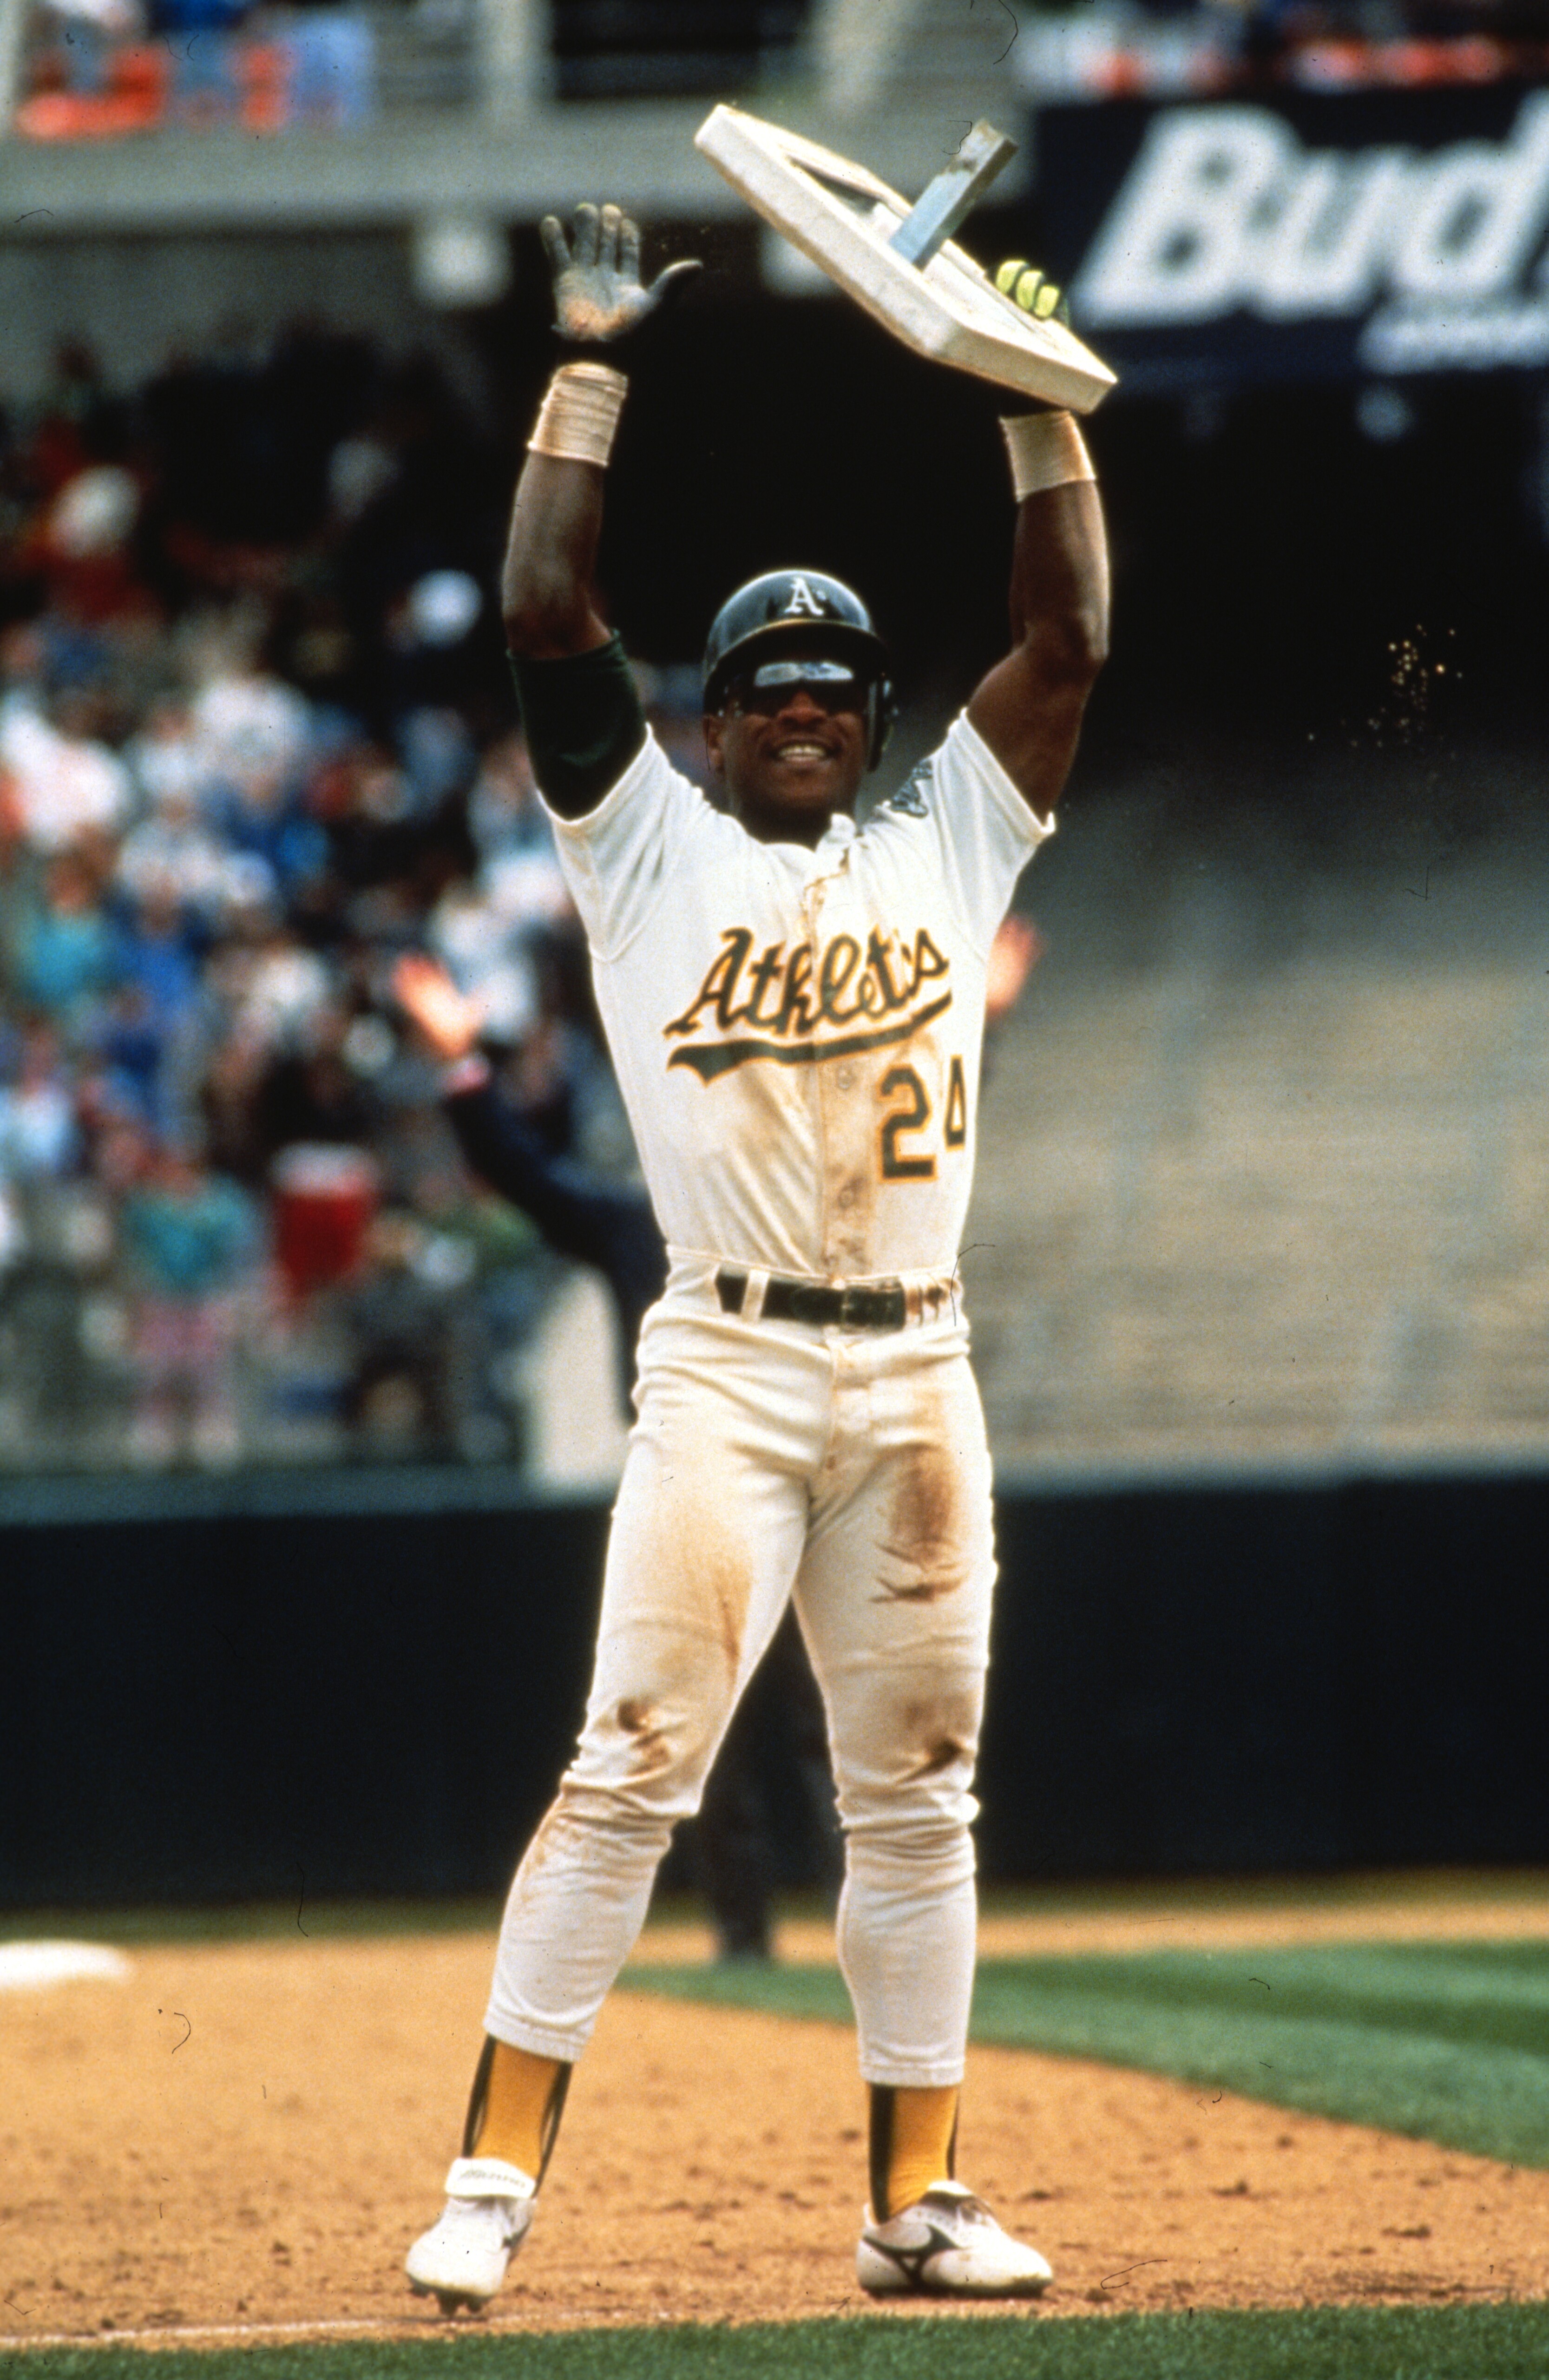 Rickey Said He Was the Greatest…And He Isn't Too Far Off